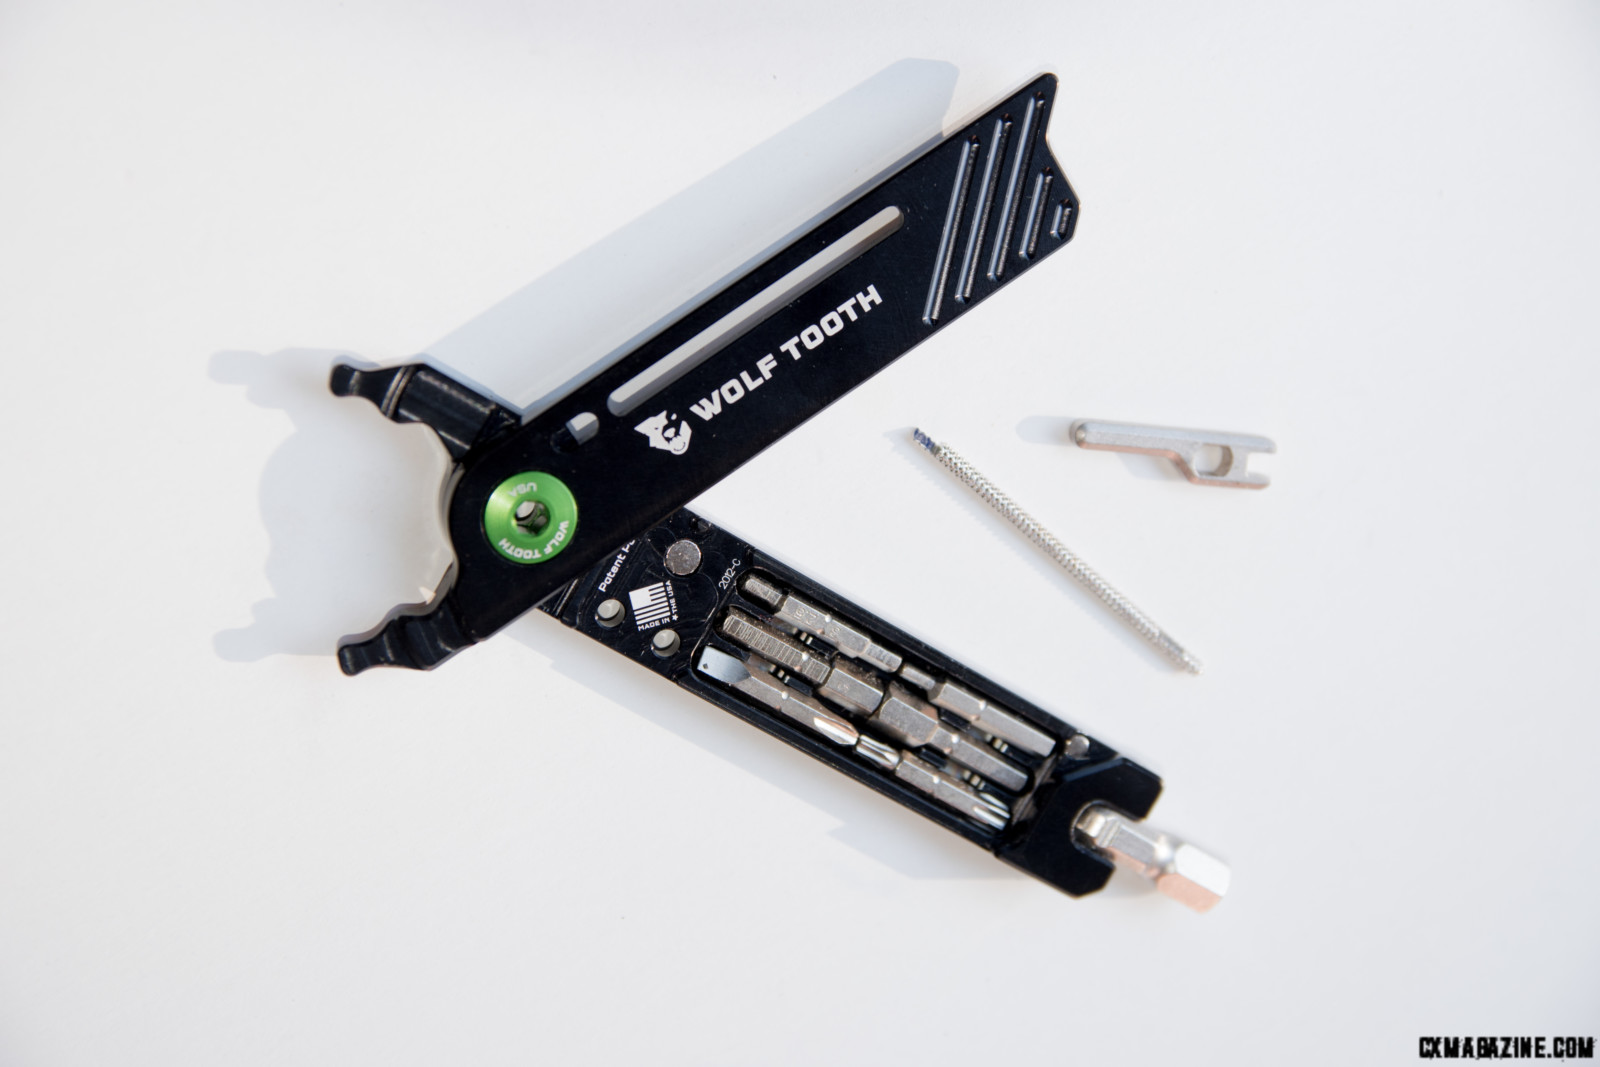 WolfTooth Components 8-Bit Pack Pliers has 8 Bits that together perform 17 functions